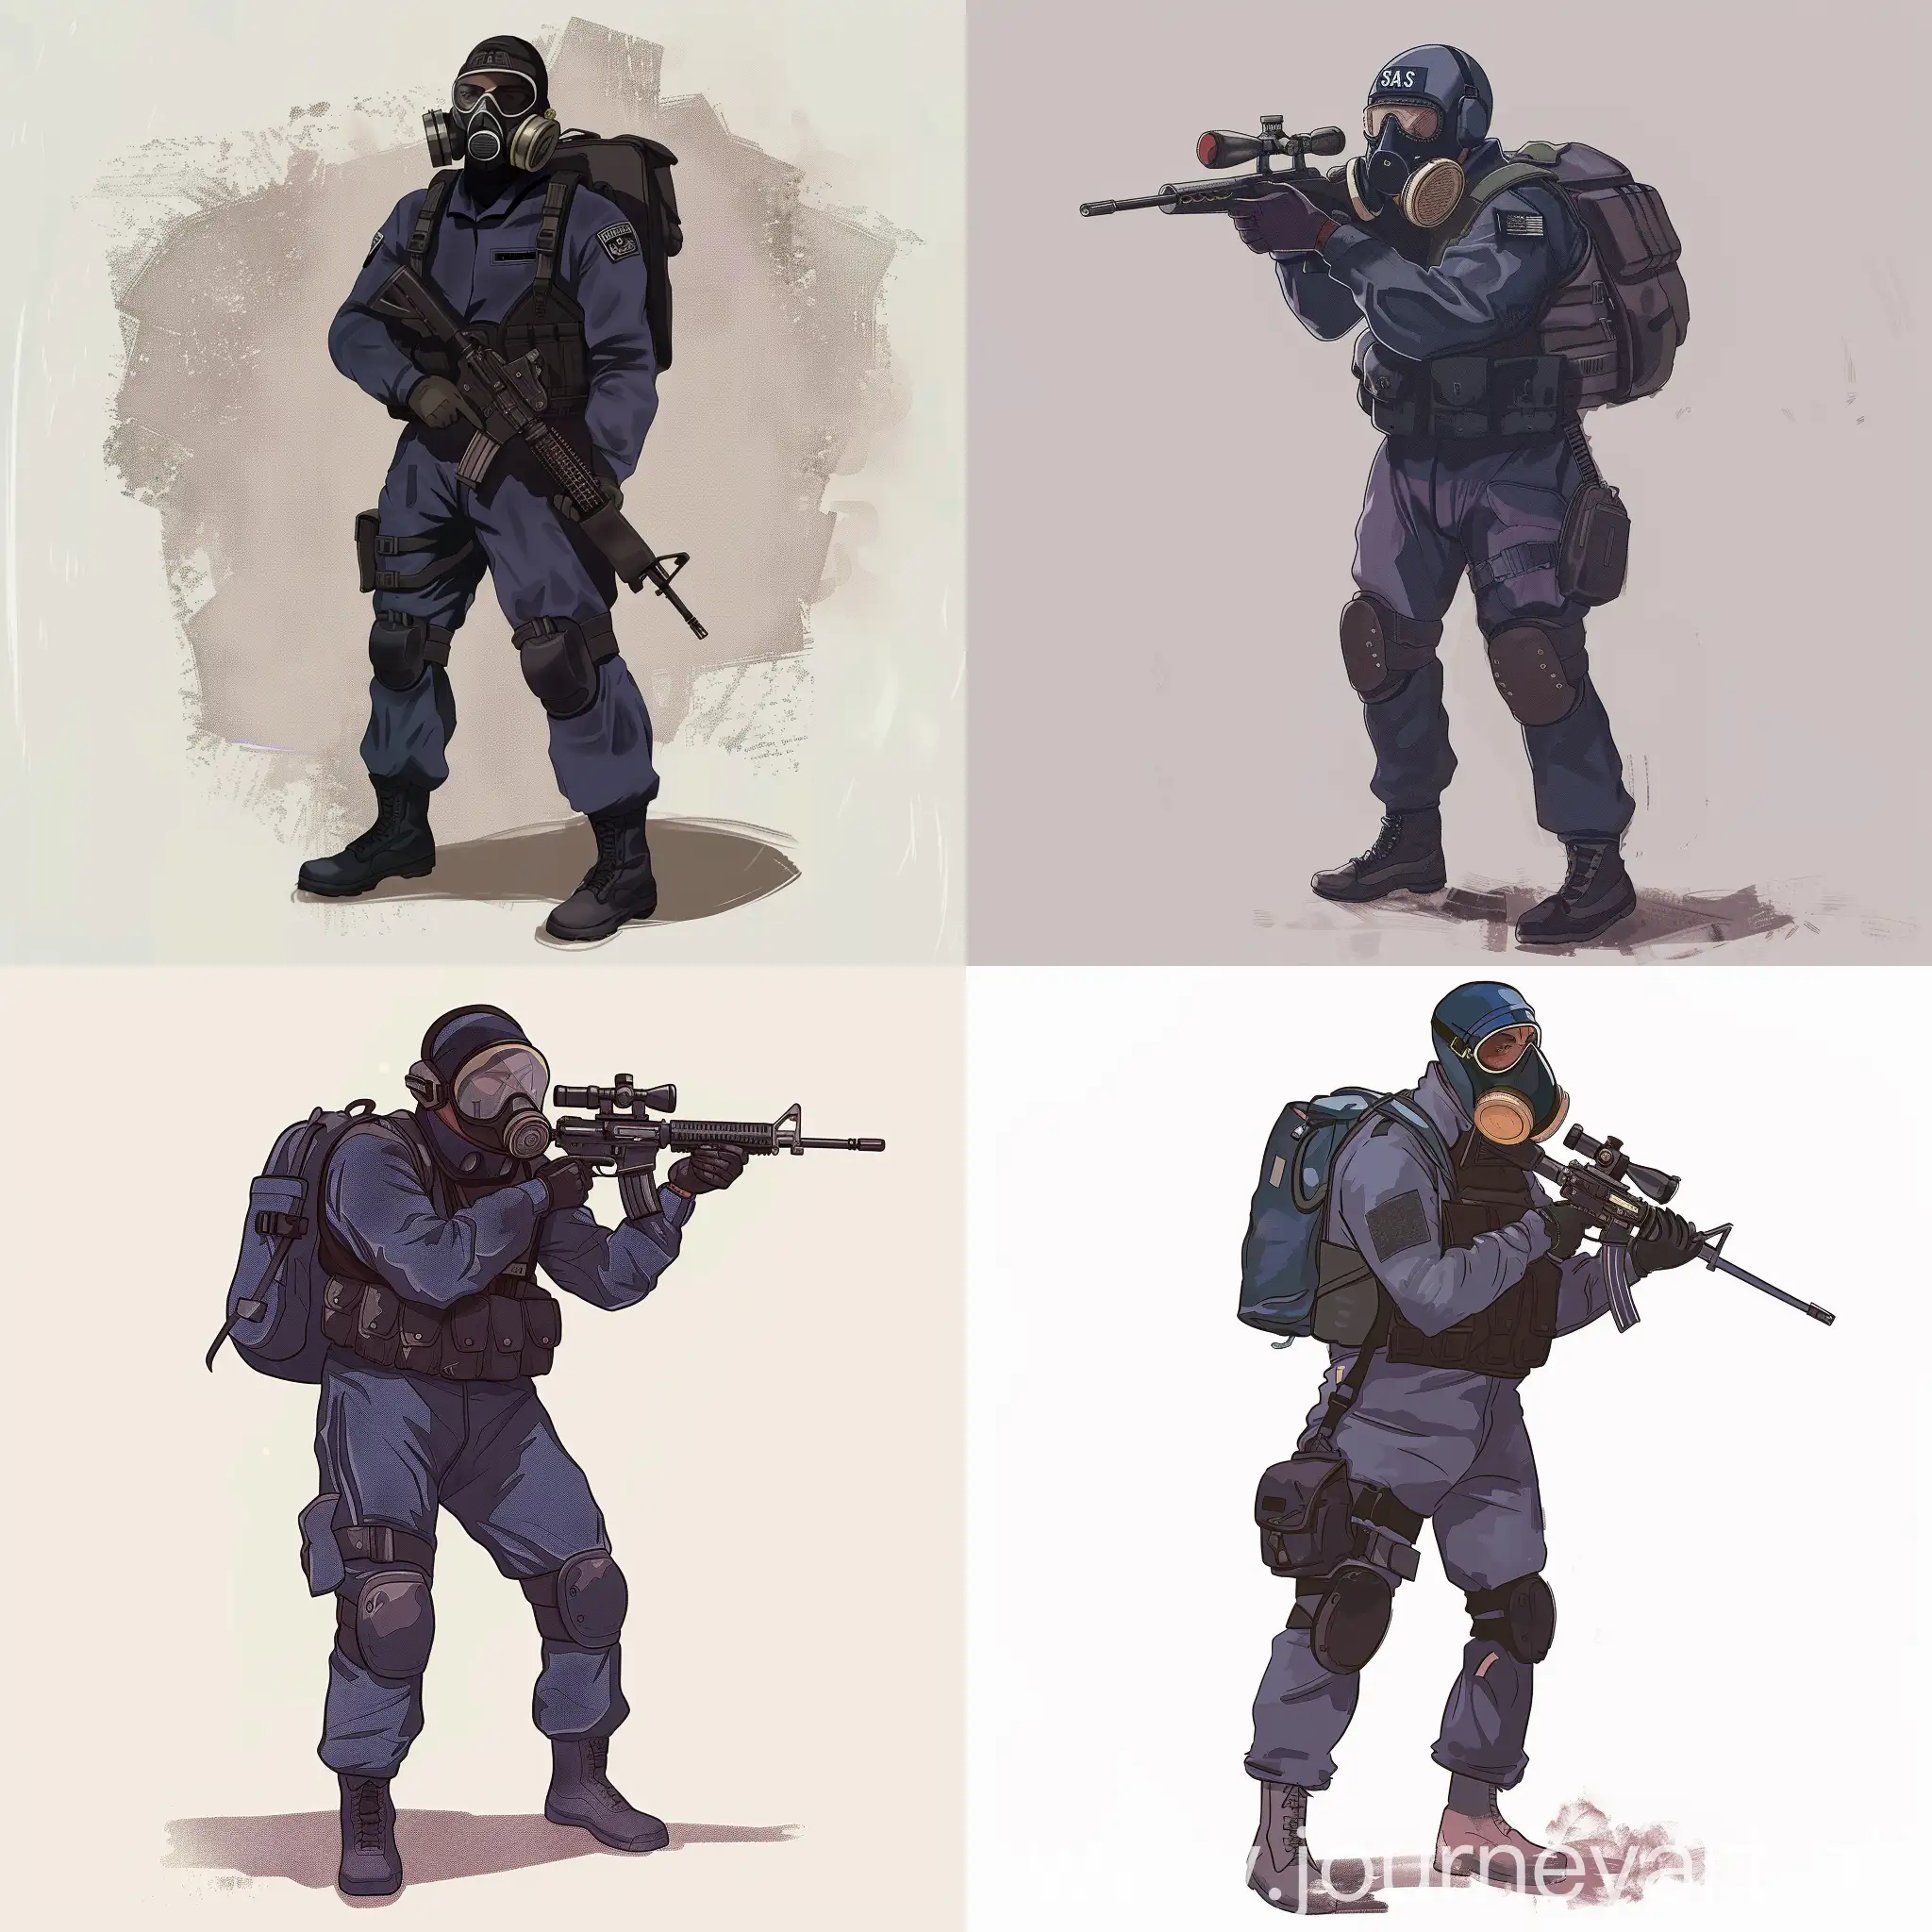 Digital character art, SAS operator, dark purple military jumpsuit, hazmat protective gasmask on his face, small military backpack, military unloading on his body, sniper rifle in his hands.